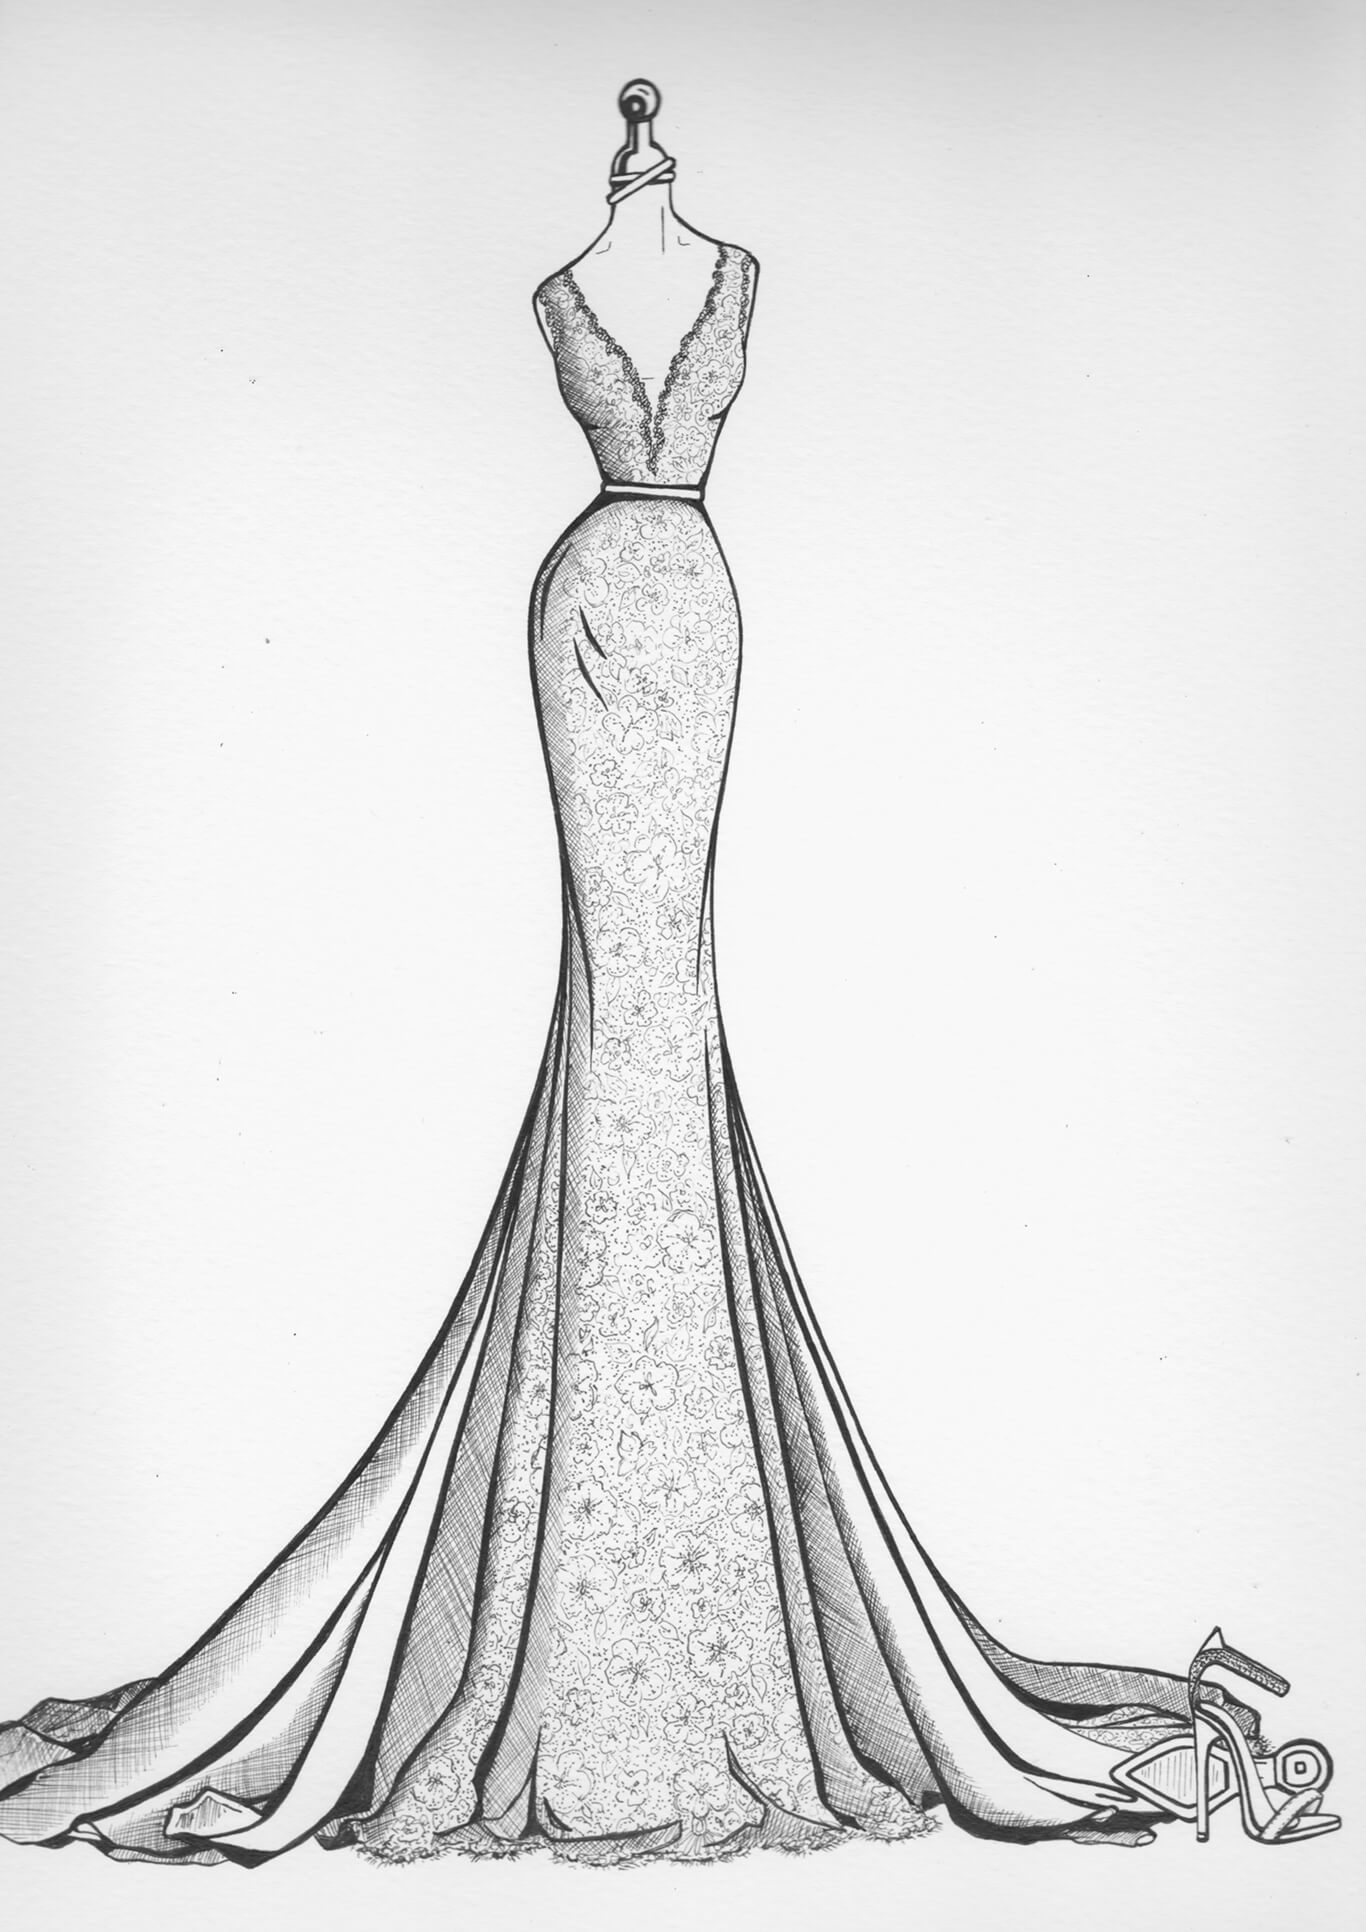 A girl with a beautiful dress || Pencil sketch. : r/Pencildrawing